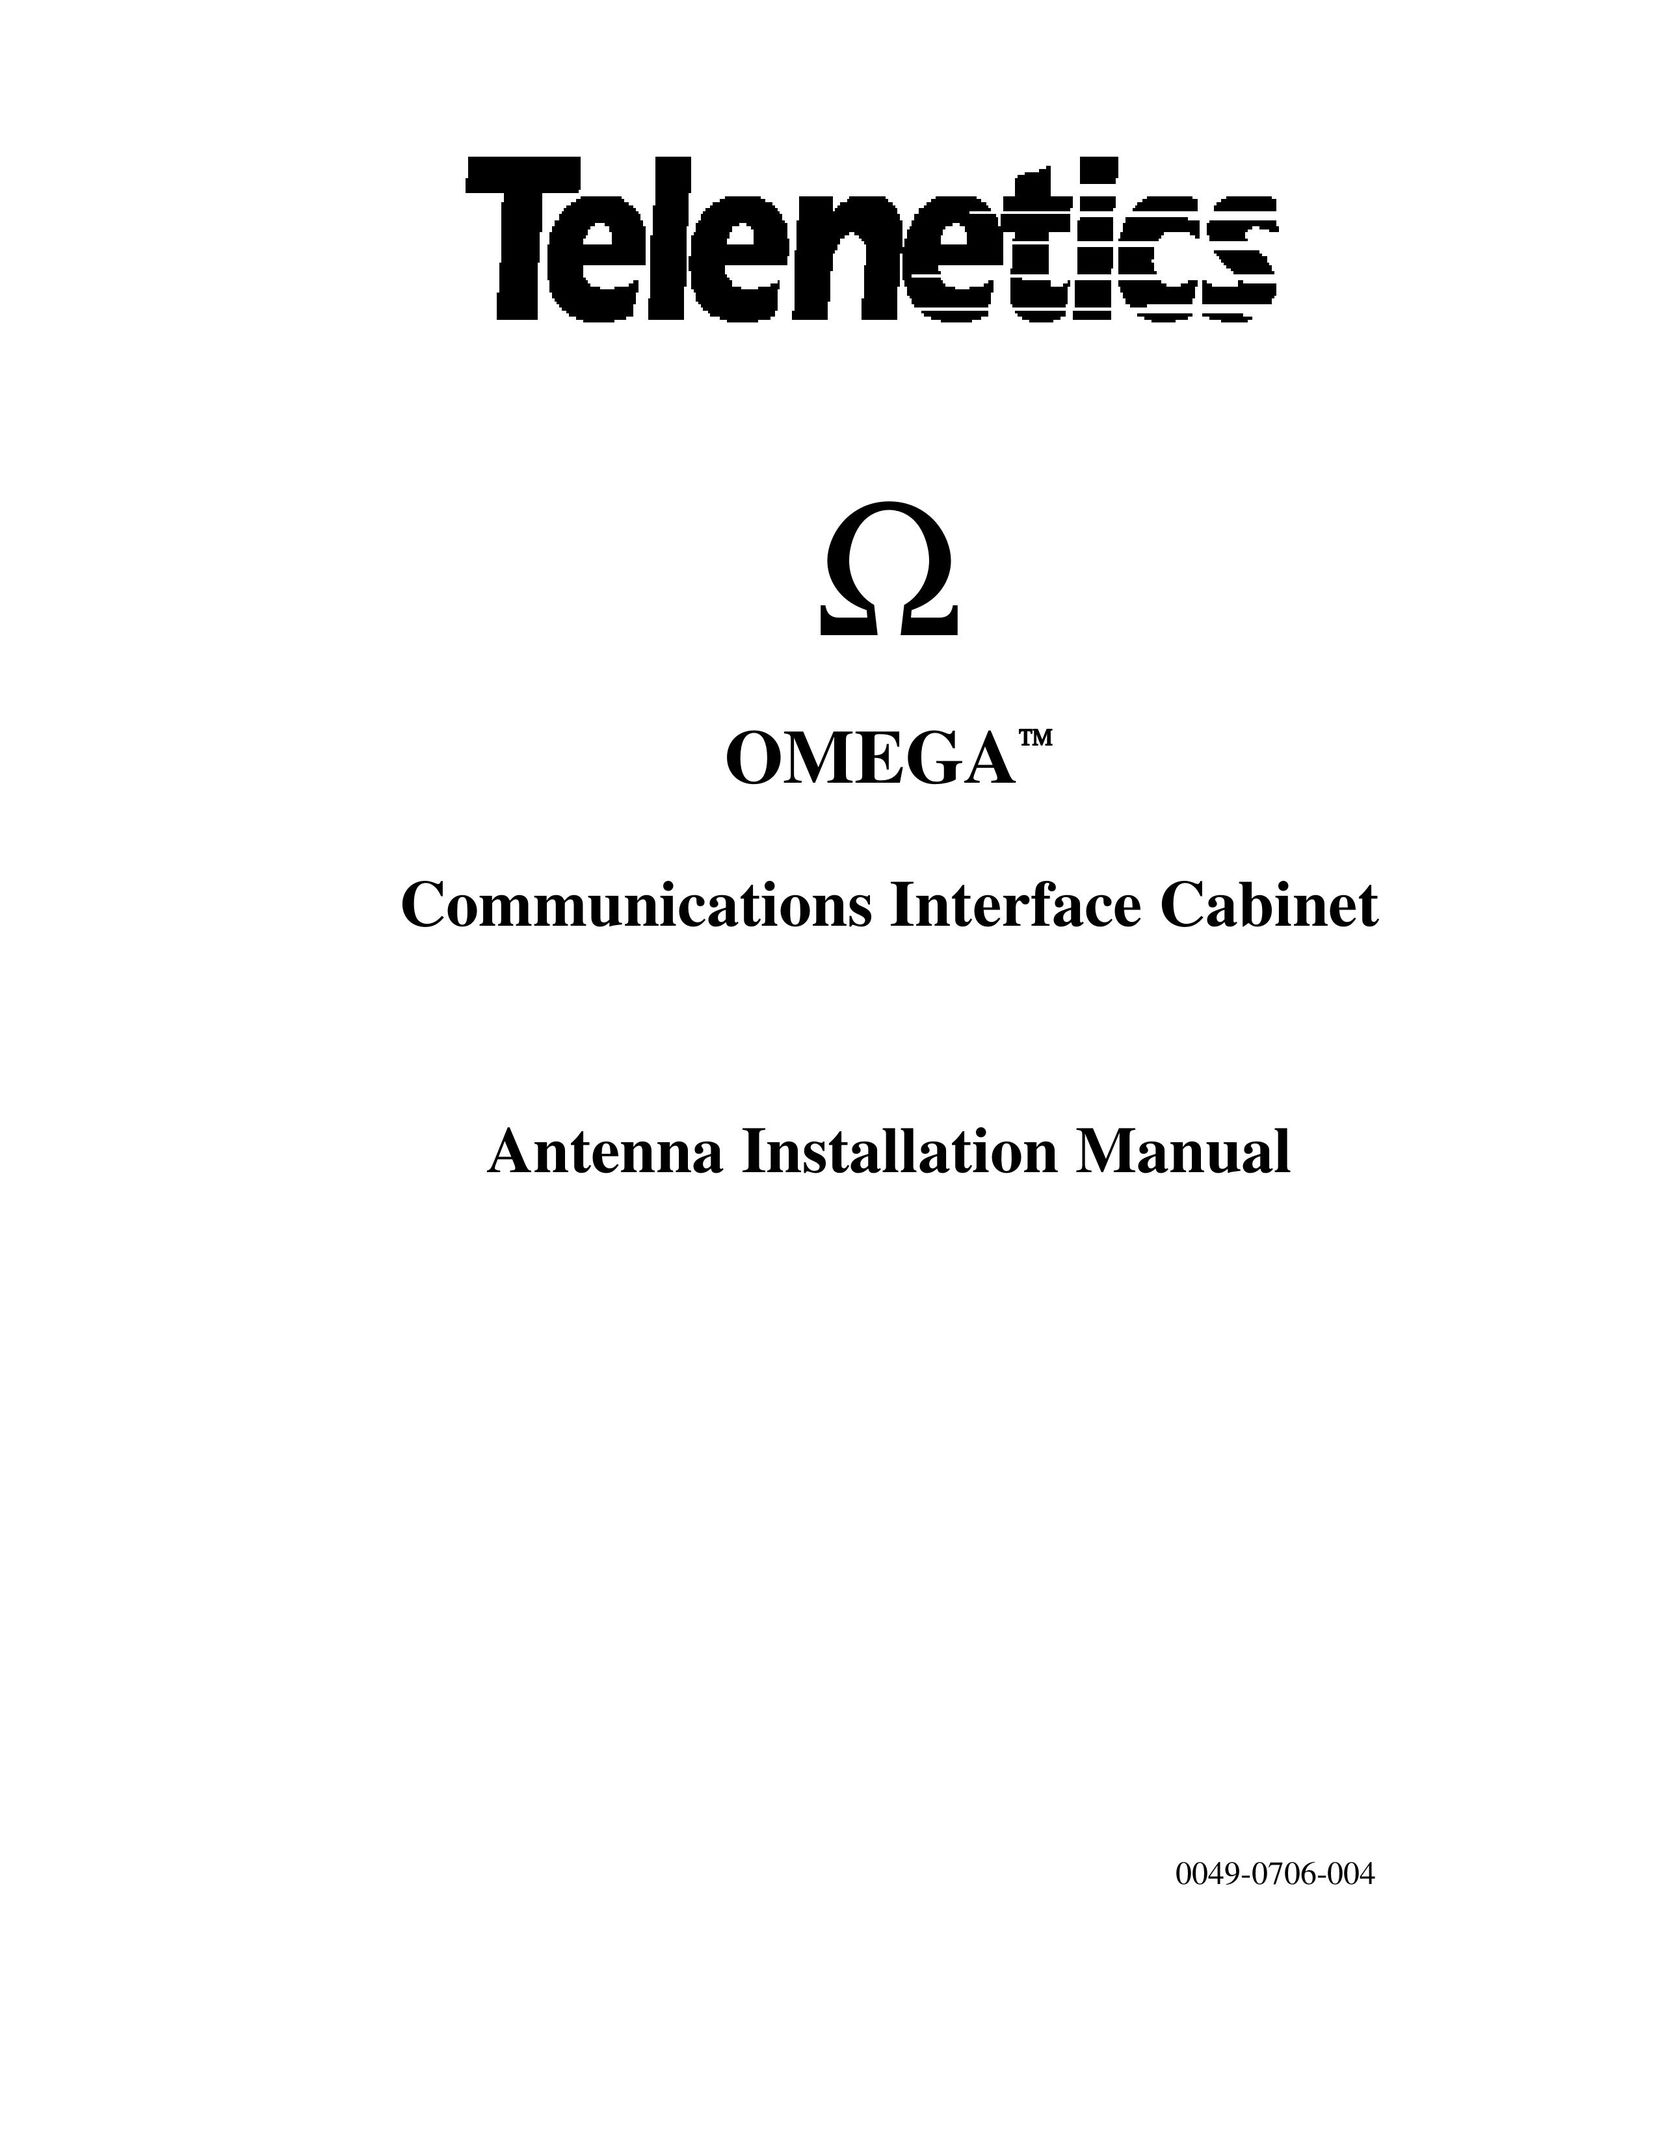 Telenetics Communications and Interface Cabinet Antenna Stereo System User Manual